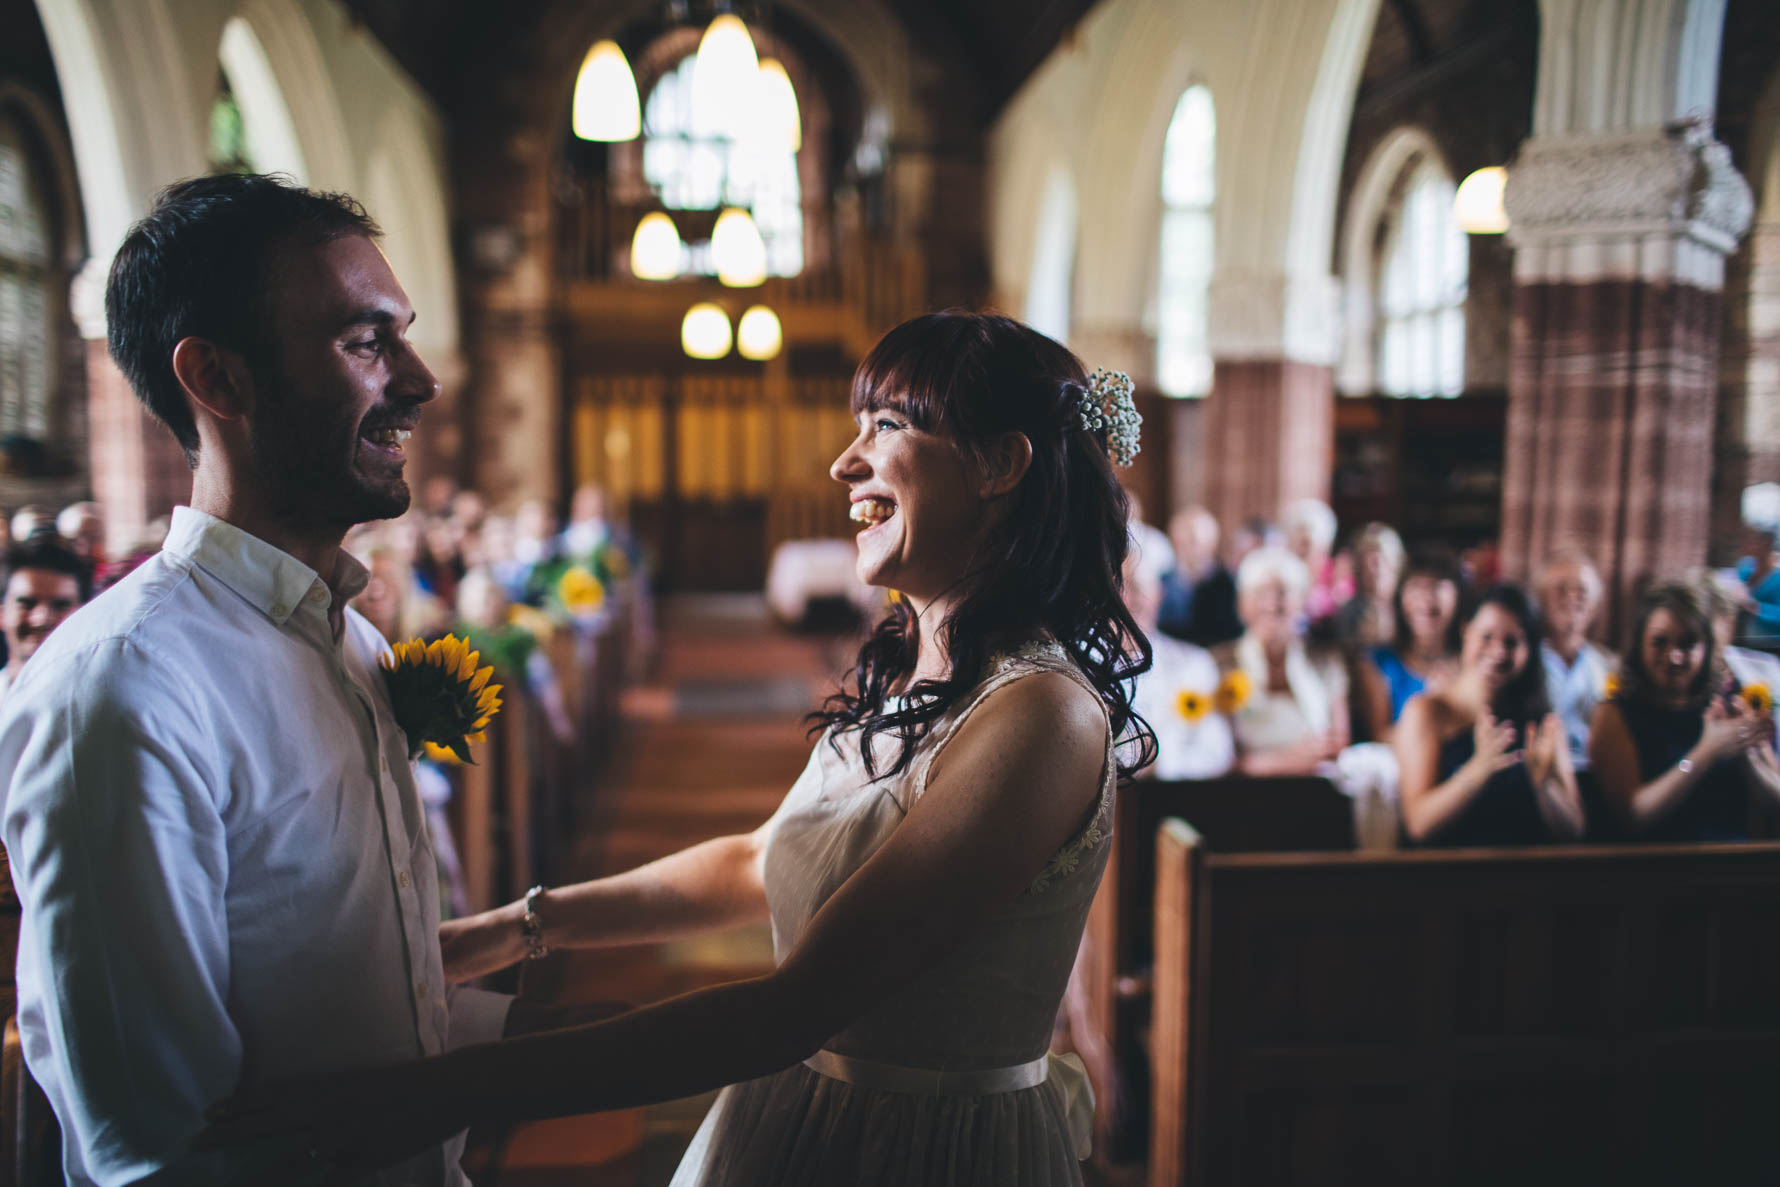 Bride and groom with their arms arund each others waists at the front of a church in Devon after just getting married. The wedding party is seated in the church pews in the background